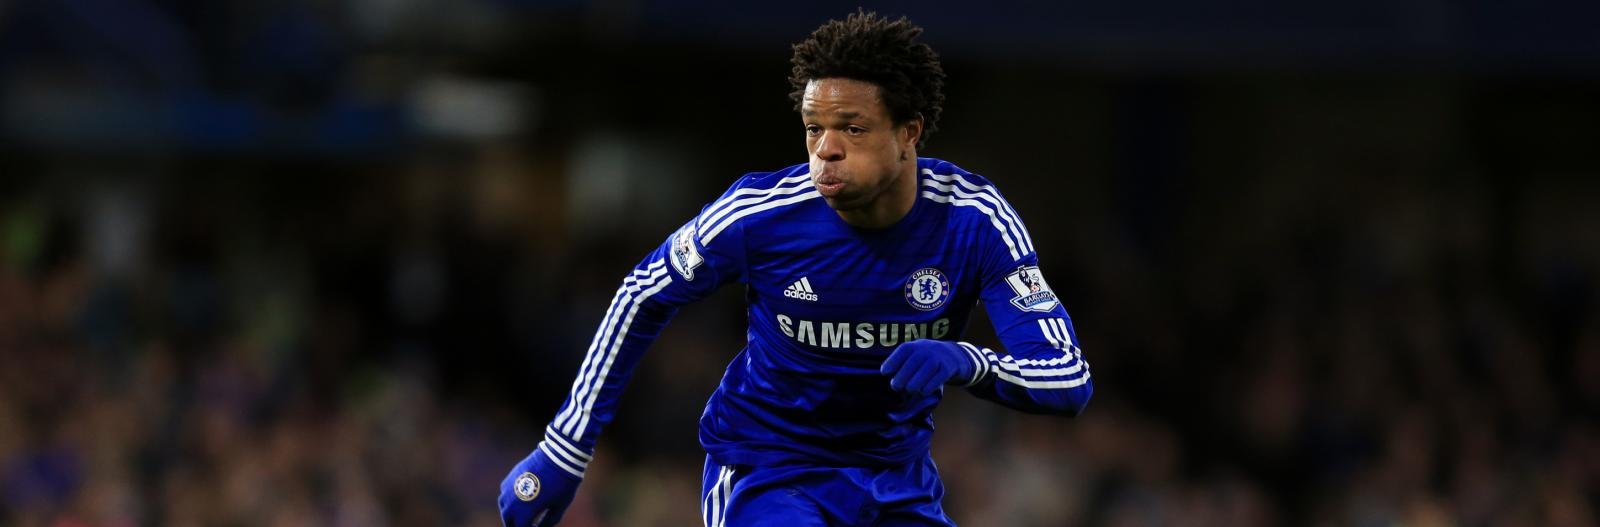 Chelsea hope to seal £70m move for former striker by using Loic Remy as a makeweight